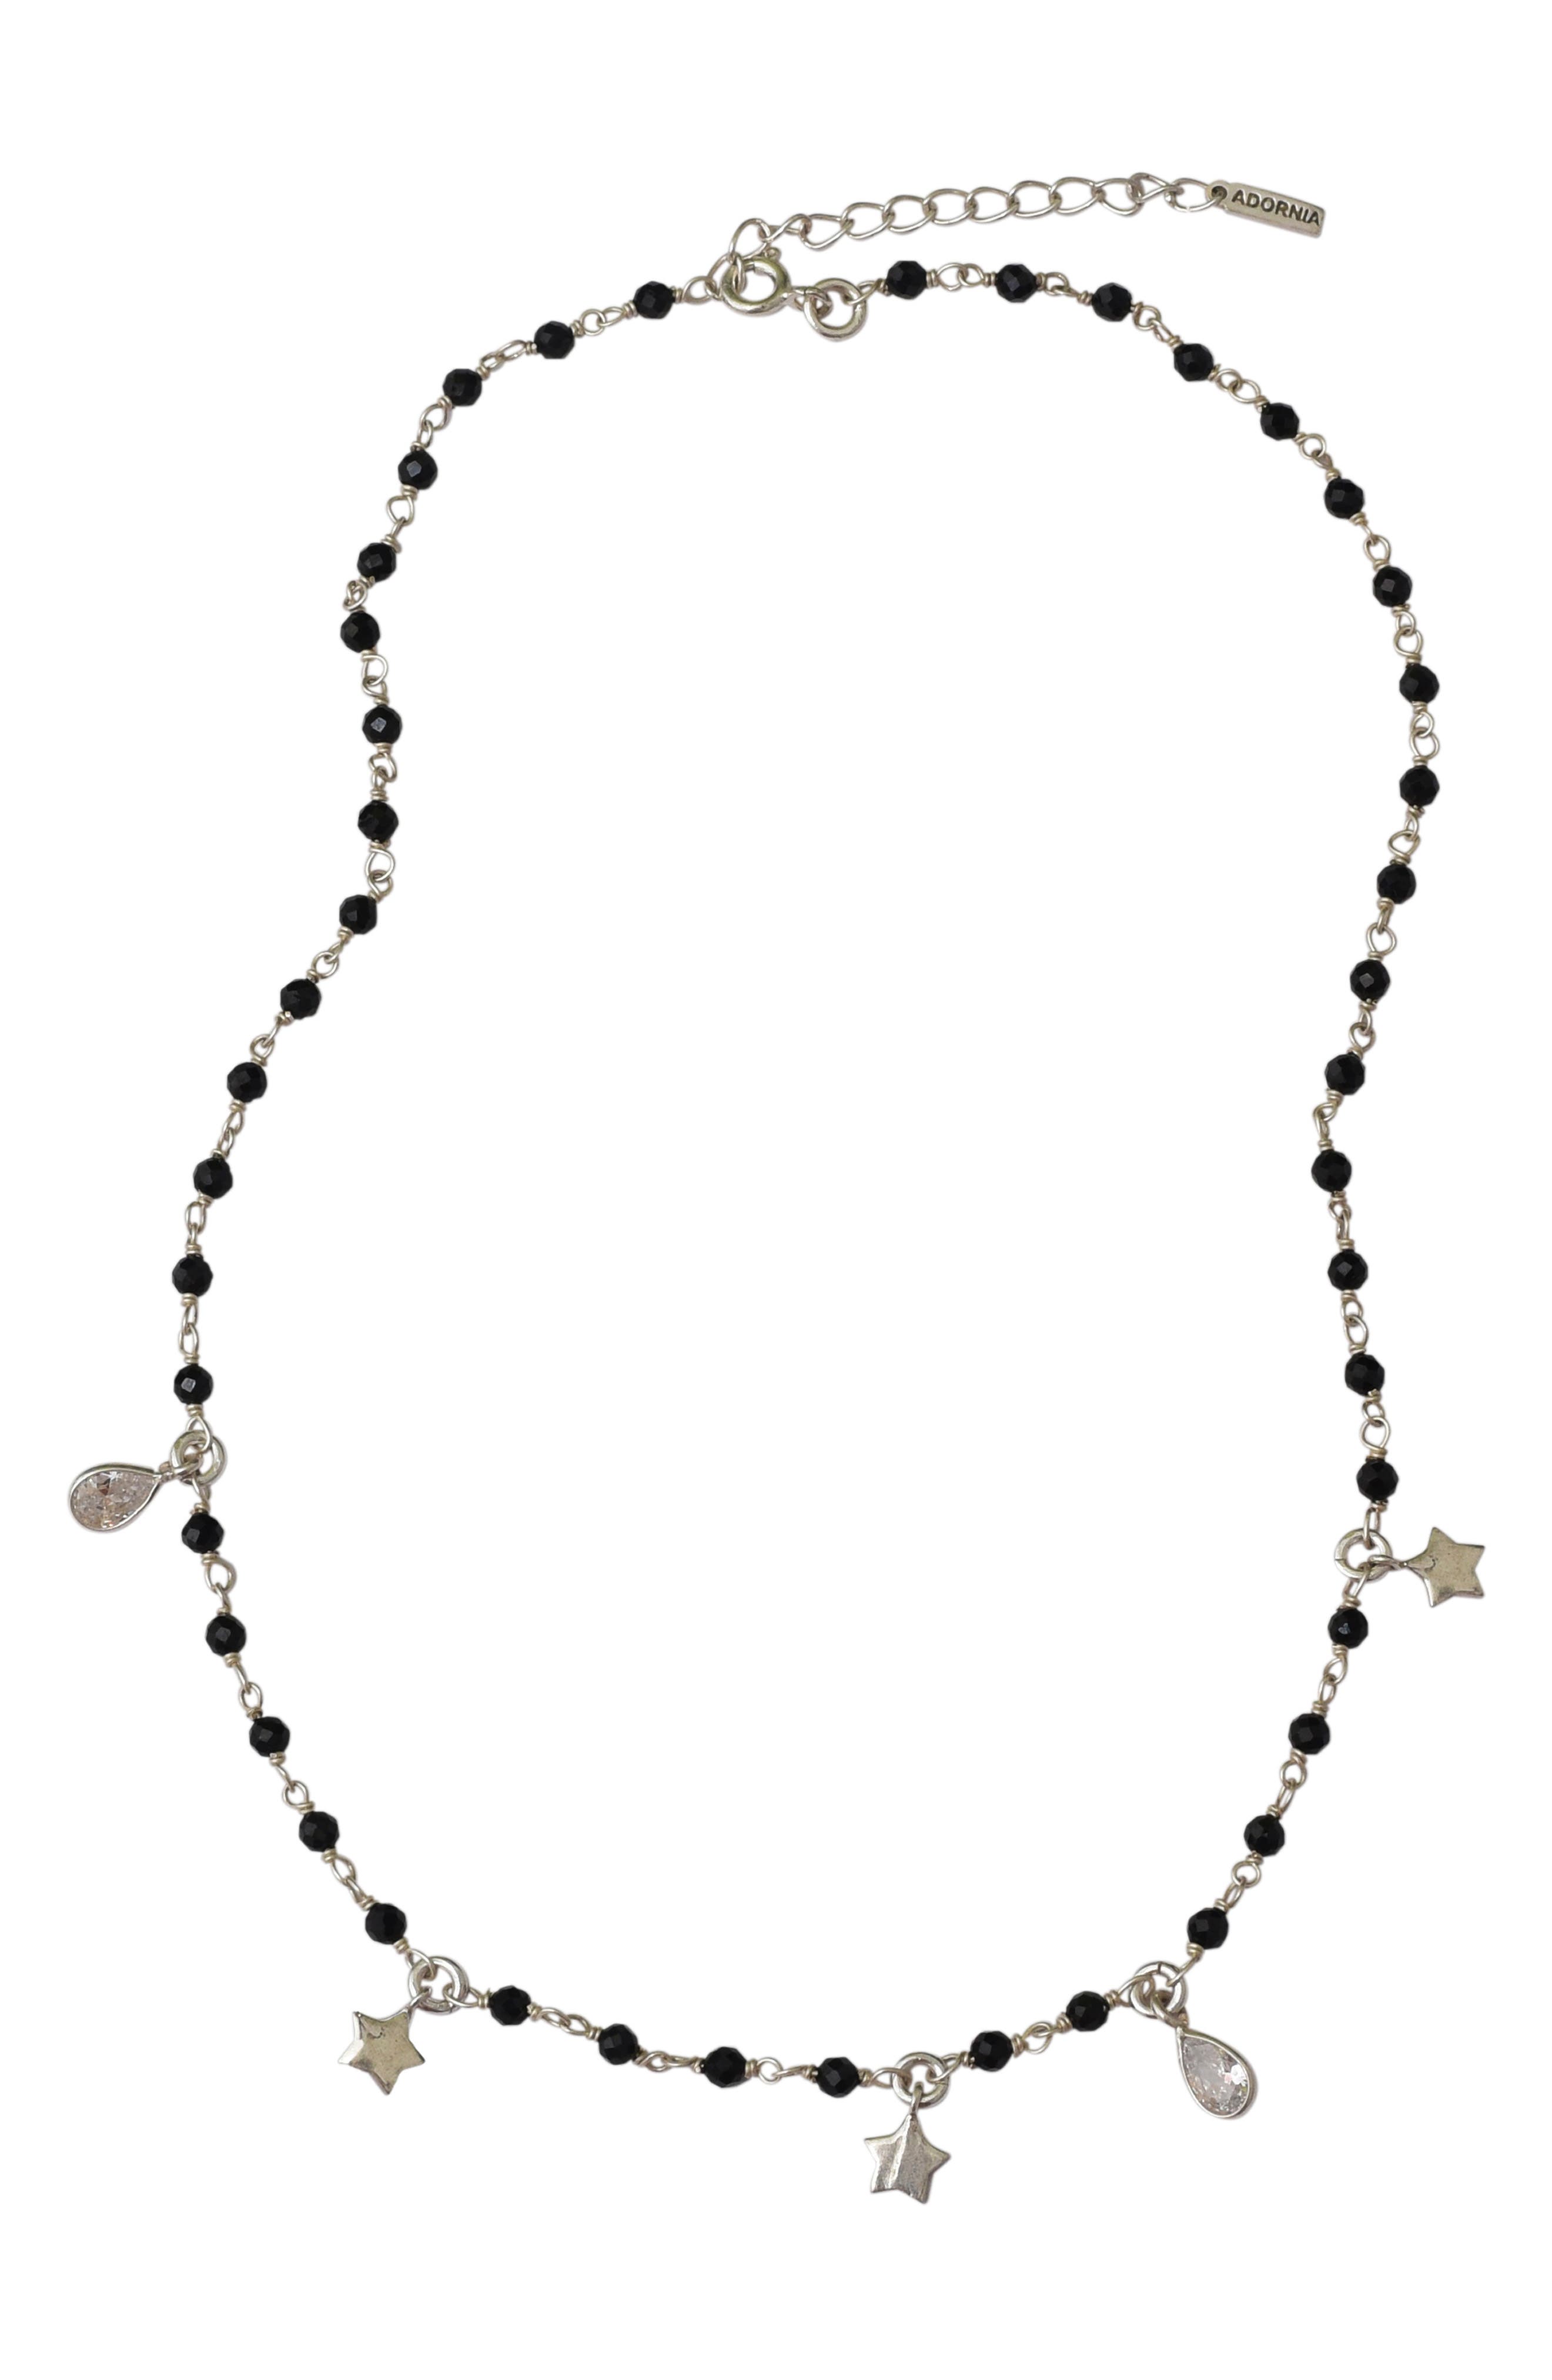 Adornia White Rhodium Plated Sterling Silver Black Spinel Beaded Star & Crystal Charm Rosary Necklace